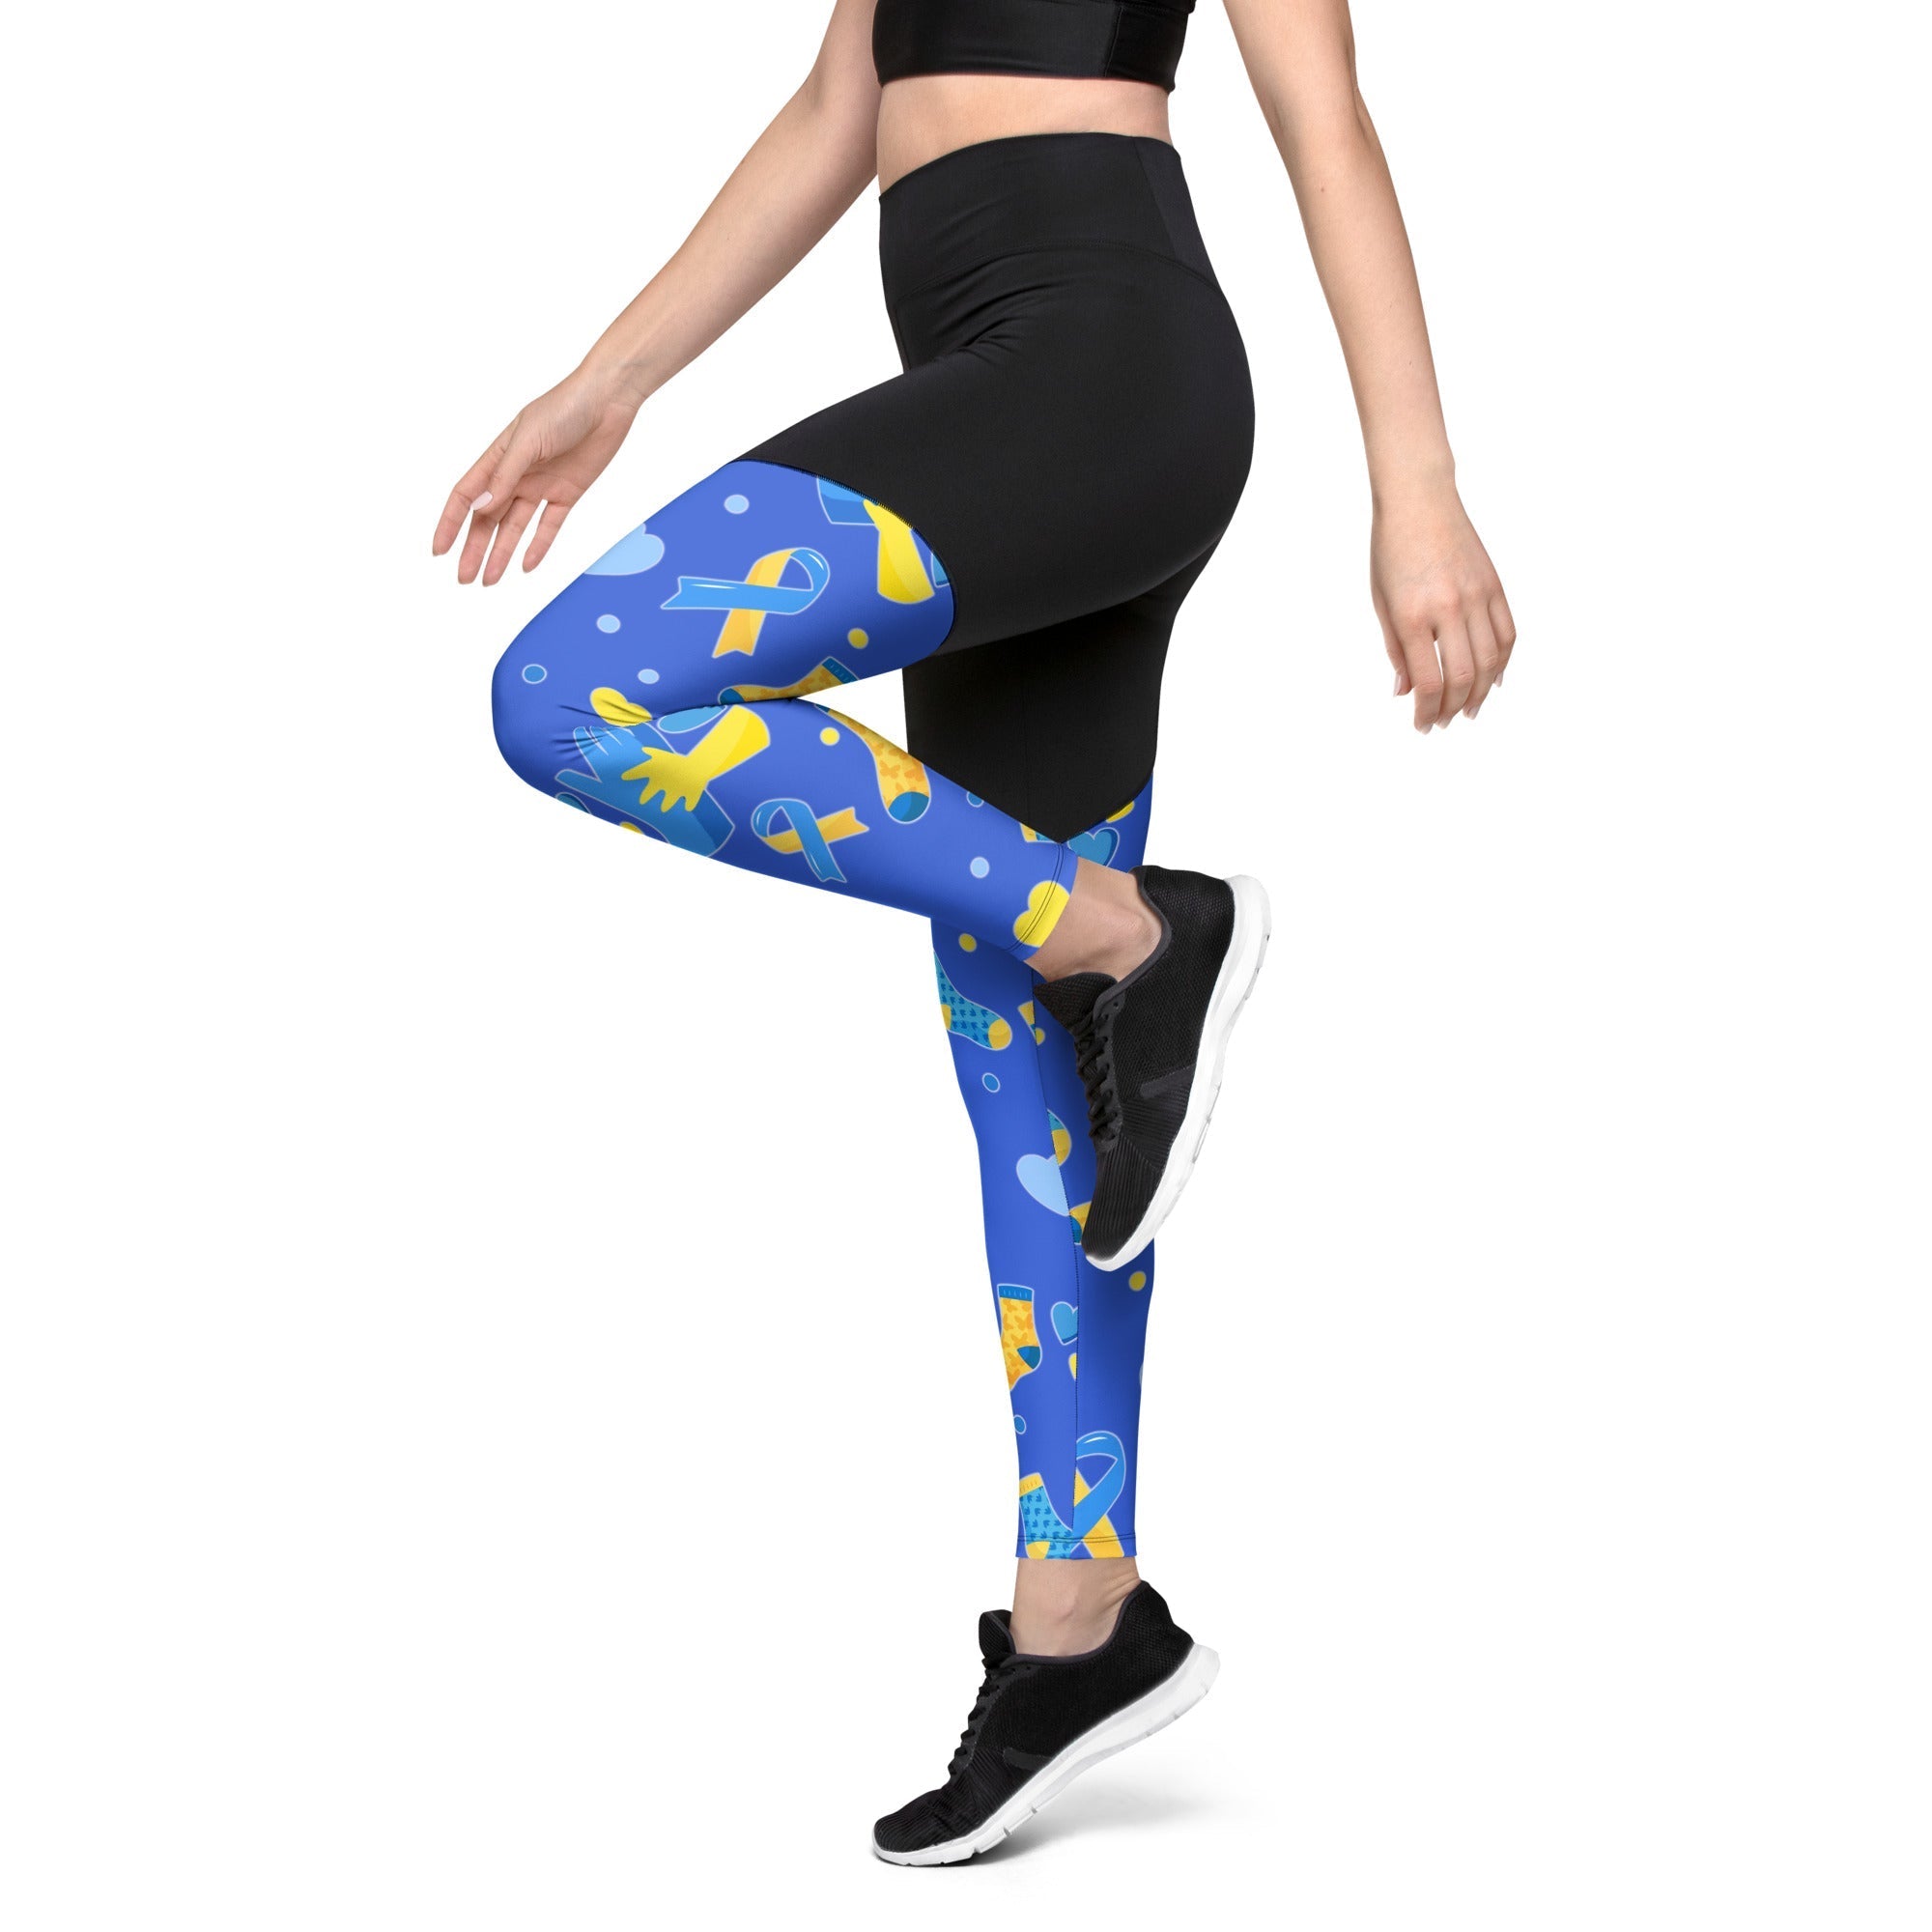 Down Syndrome Awareness Compression Leggings